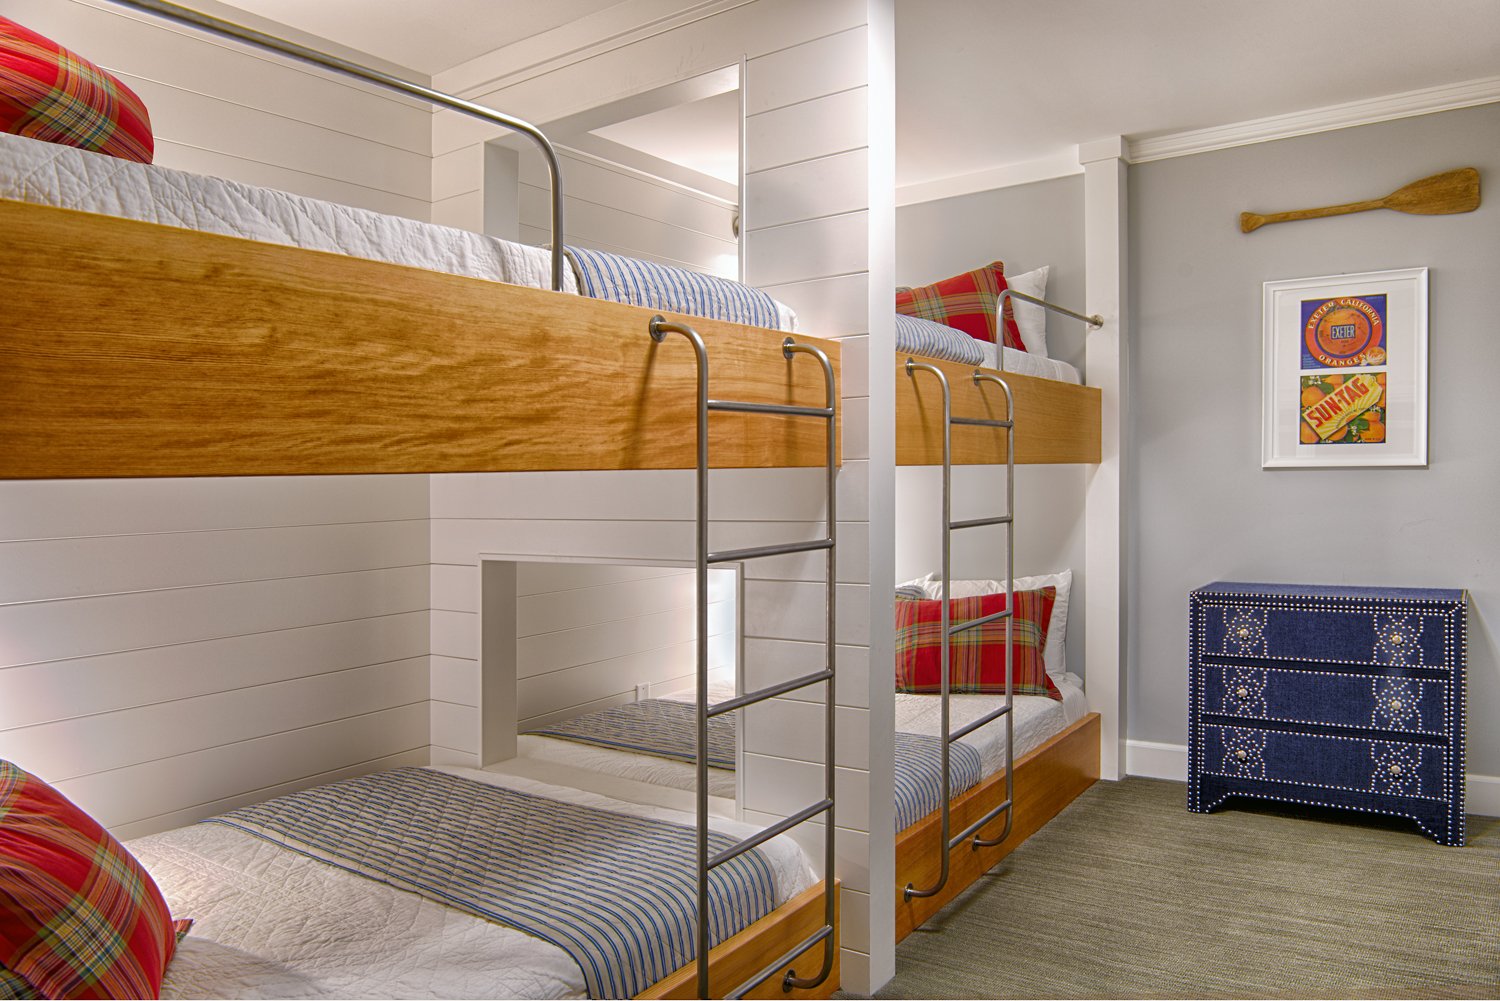  Bedroom with four built-in bunkbeds.  